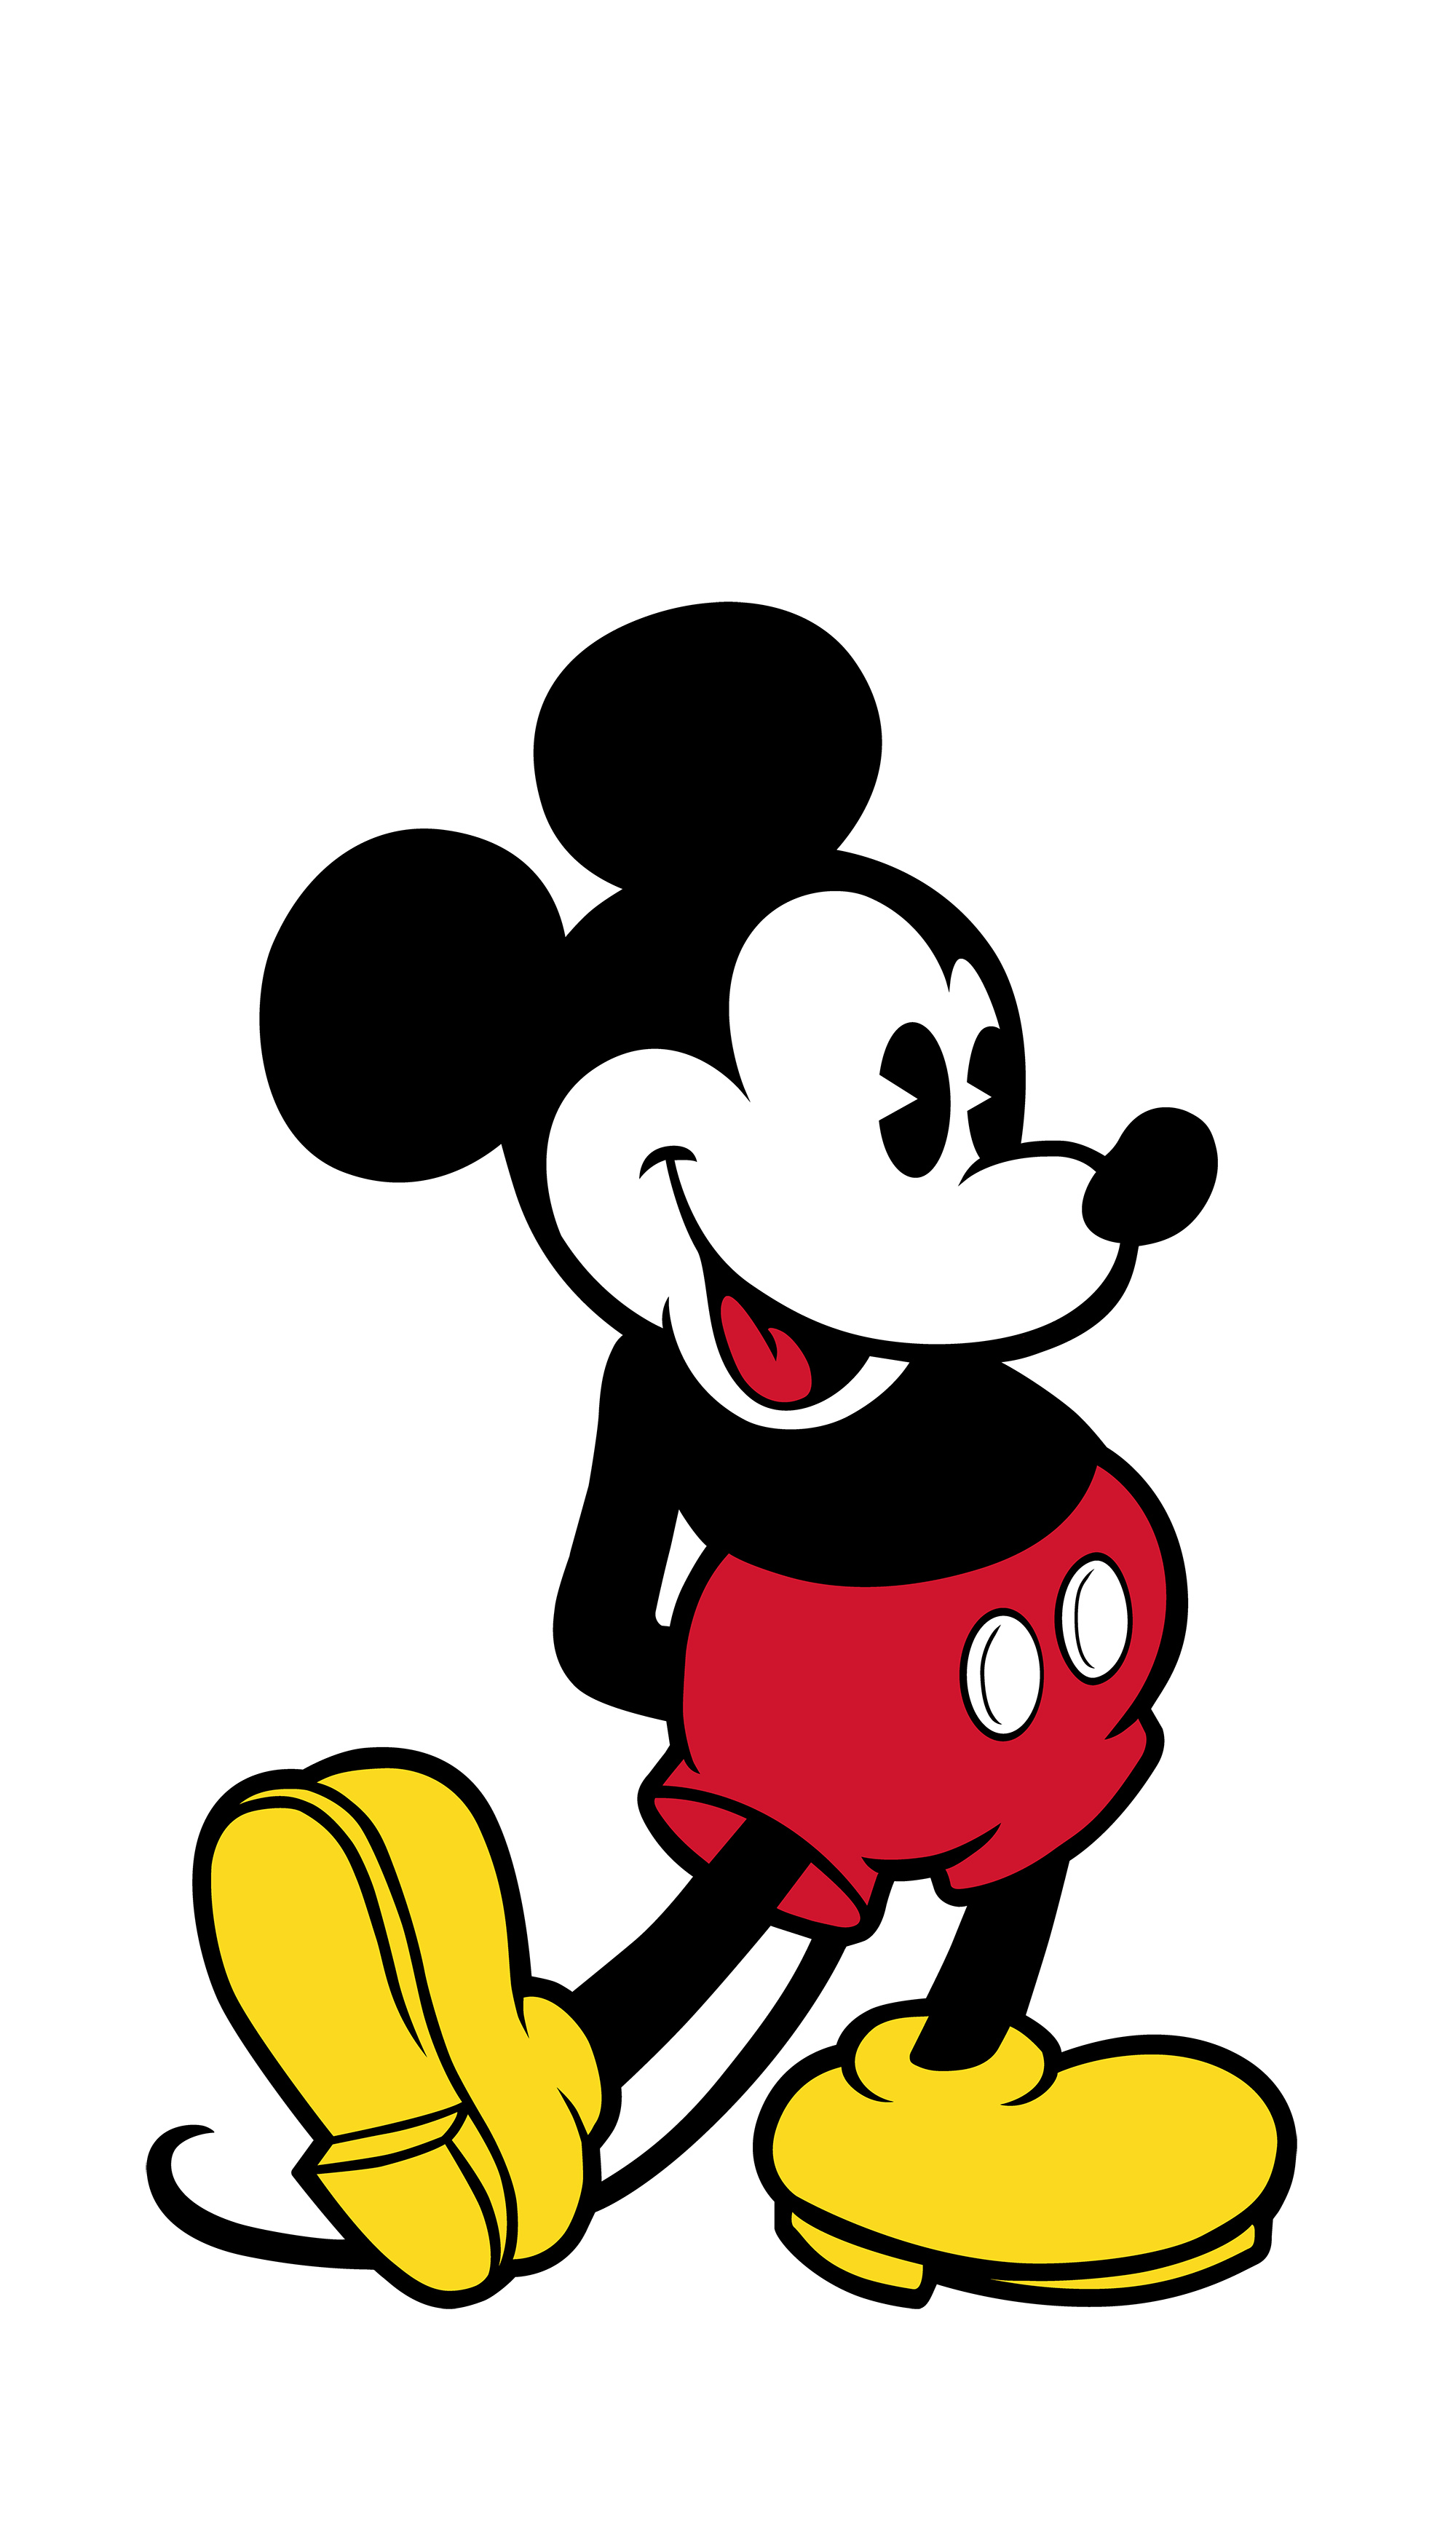 Disney wallpapers for iPhone, 140 iconic designs, Creative backgrounds, 2000x3500 HD Phone